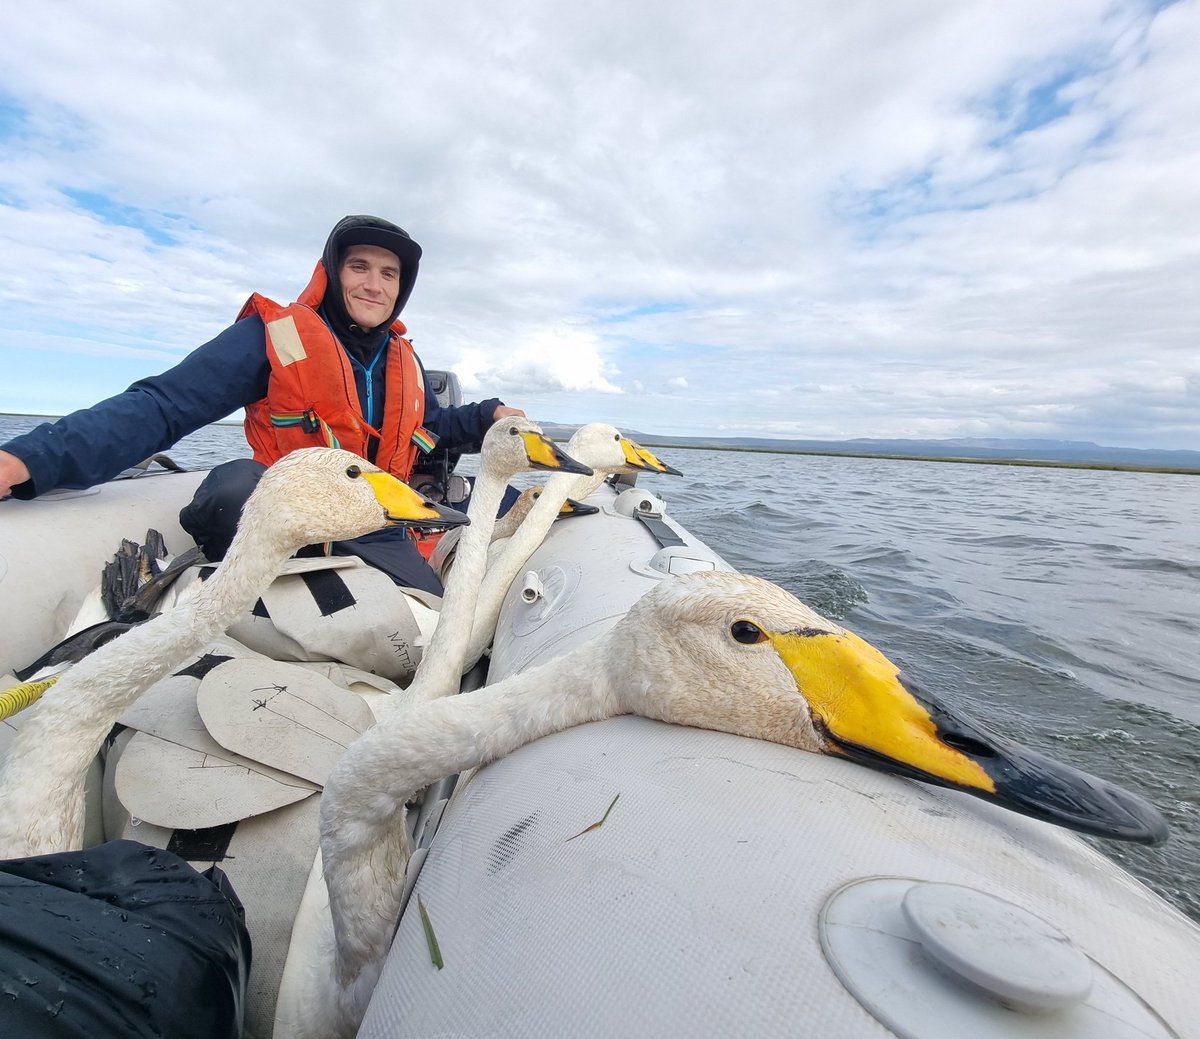 & we're off! A good start today to our new Whooper Swan project with 25 birds colour-marked. Here's @Stephen8Vickers bringing in the first birds ready for @ScottoftheMarsh to ring. #WhooperIceland2023